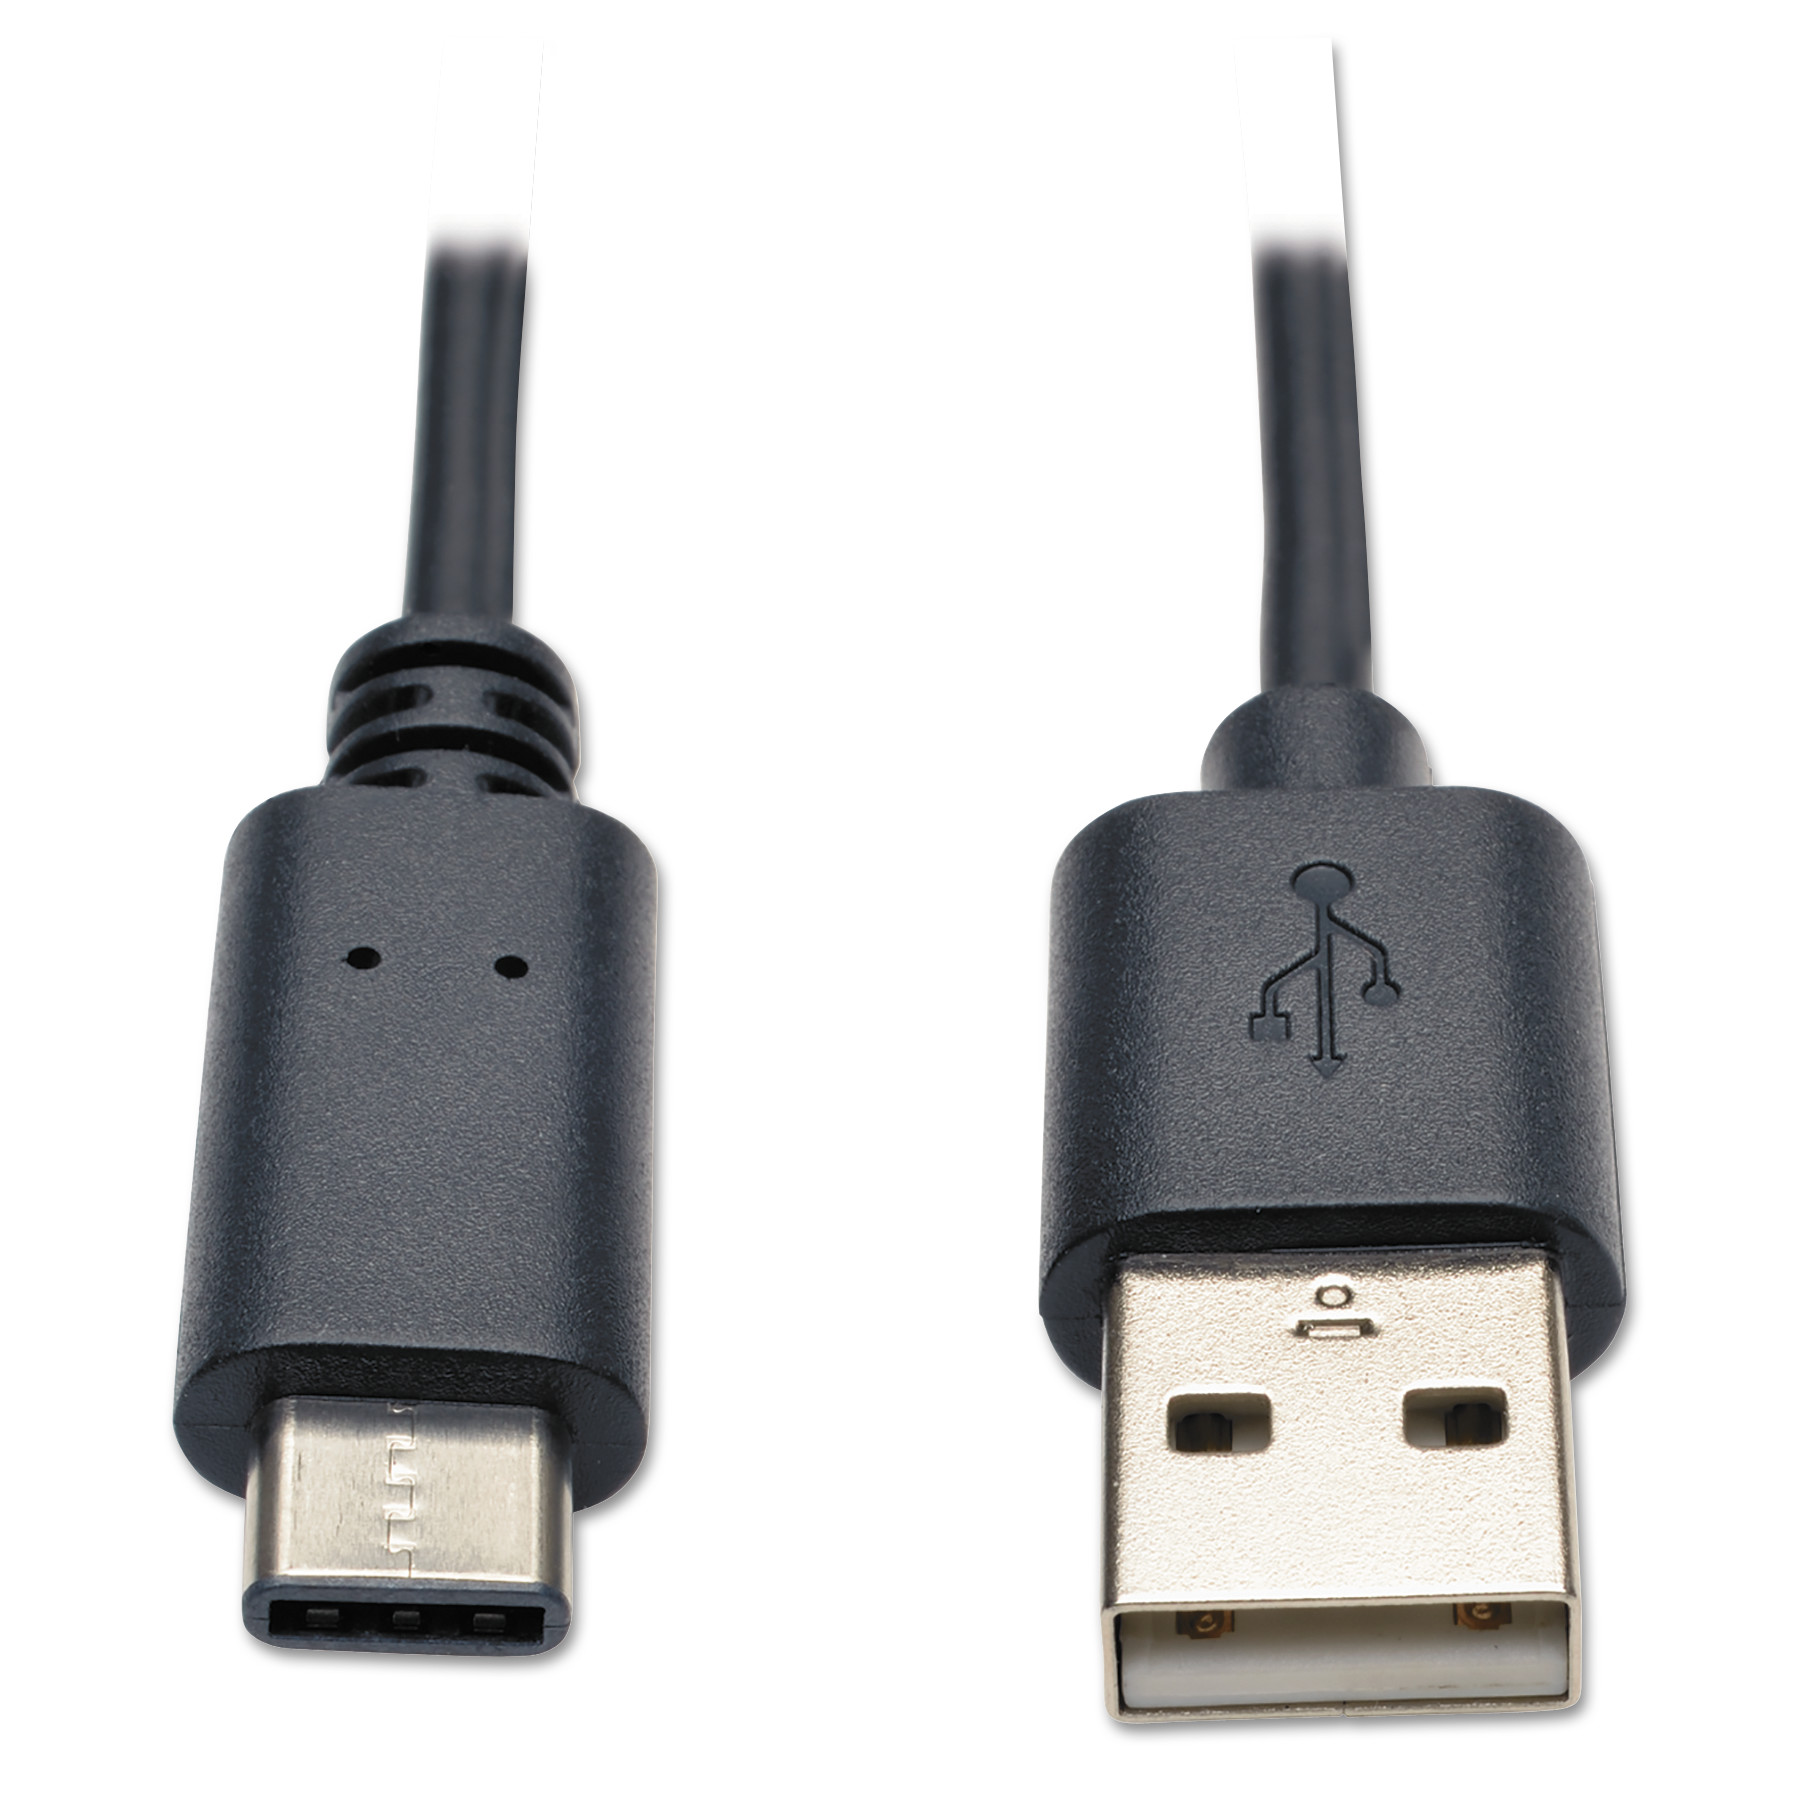 USB 2.0 Gold Cable, USB A Male, 6 ft, Black